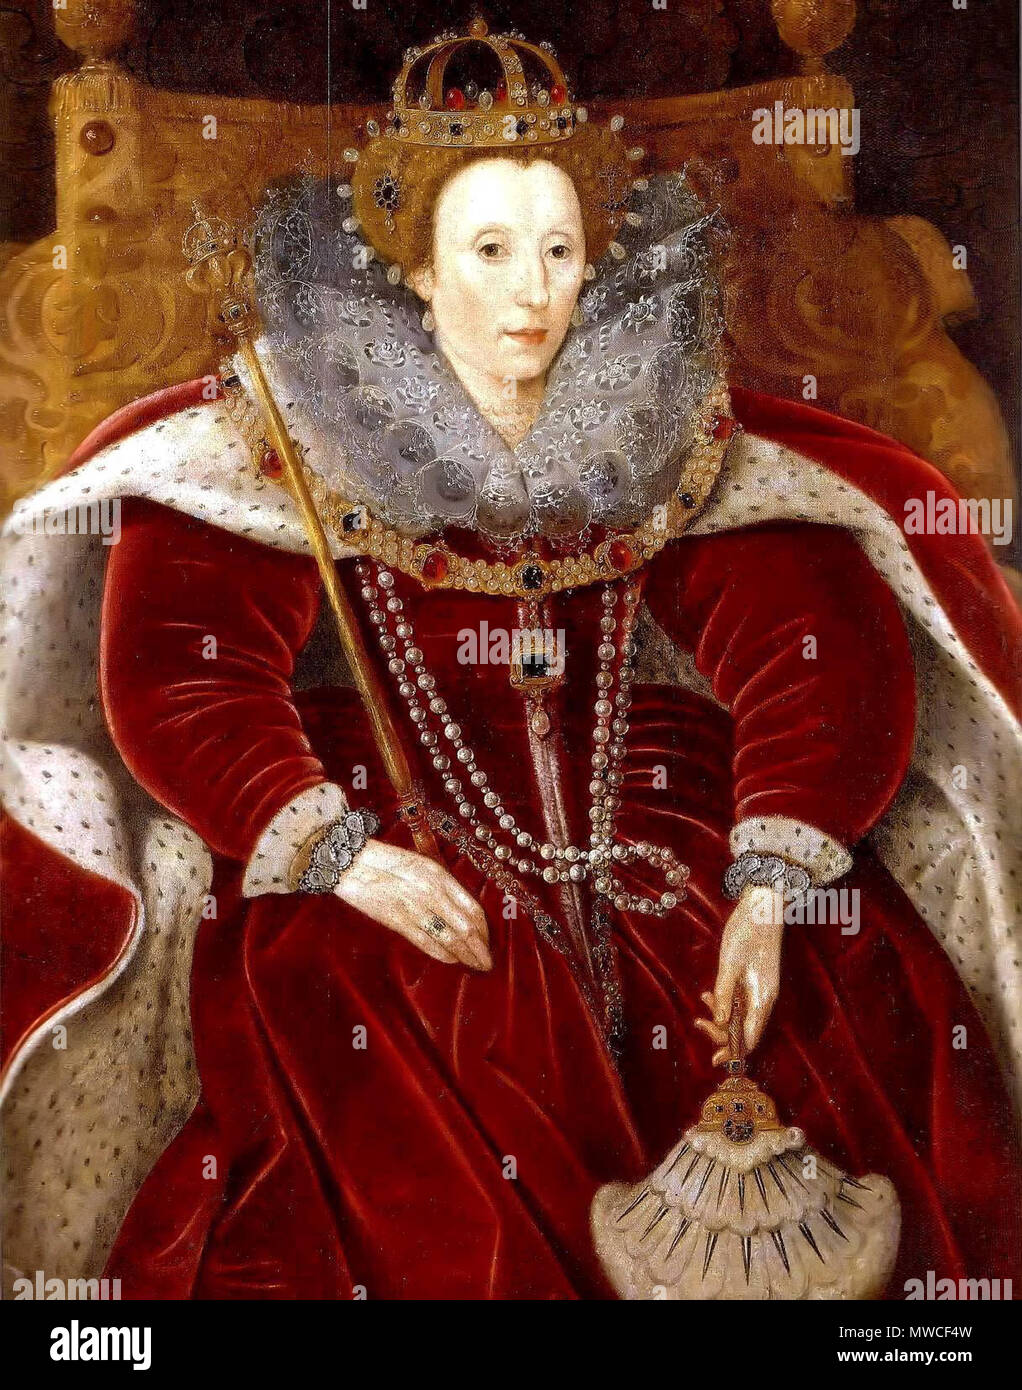 . Elizabeth I of England in Parliament Robes, Helmingham Hall, Stowmarket . circa 1585-90. formerly attributed to Marcus Gheeraerts the Younger, exhibited 2003 as 'British School* 184 Elizabeth I in Parliament Robes Stock Photo